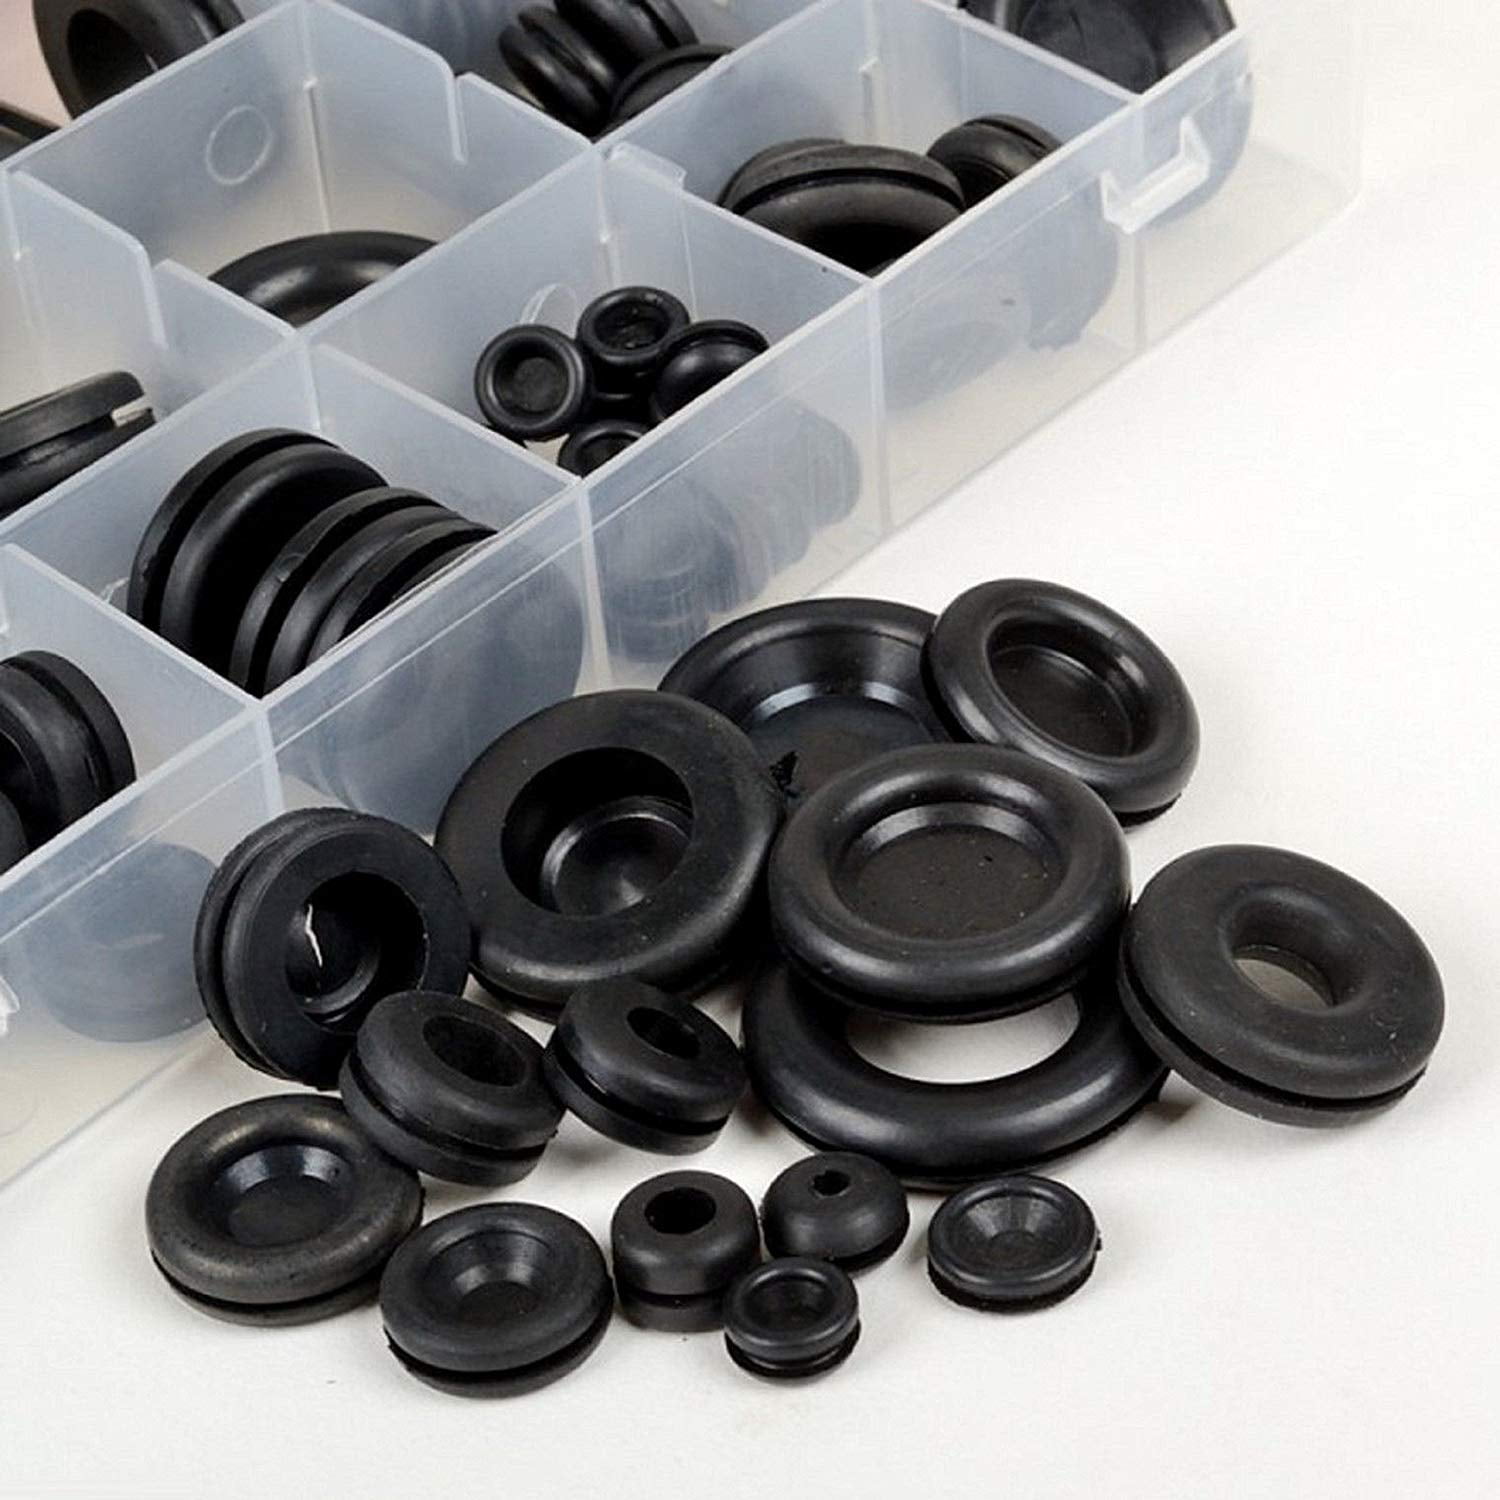 125Pc Rubber Grommet Assortment Firewall Hole Plug Set Electrical Wire Gasket, WennoW 125Pc